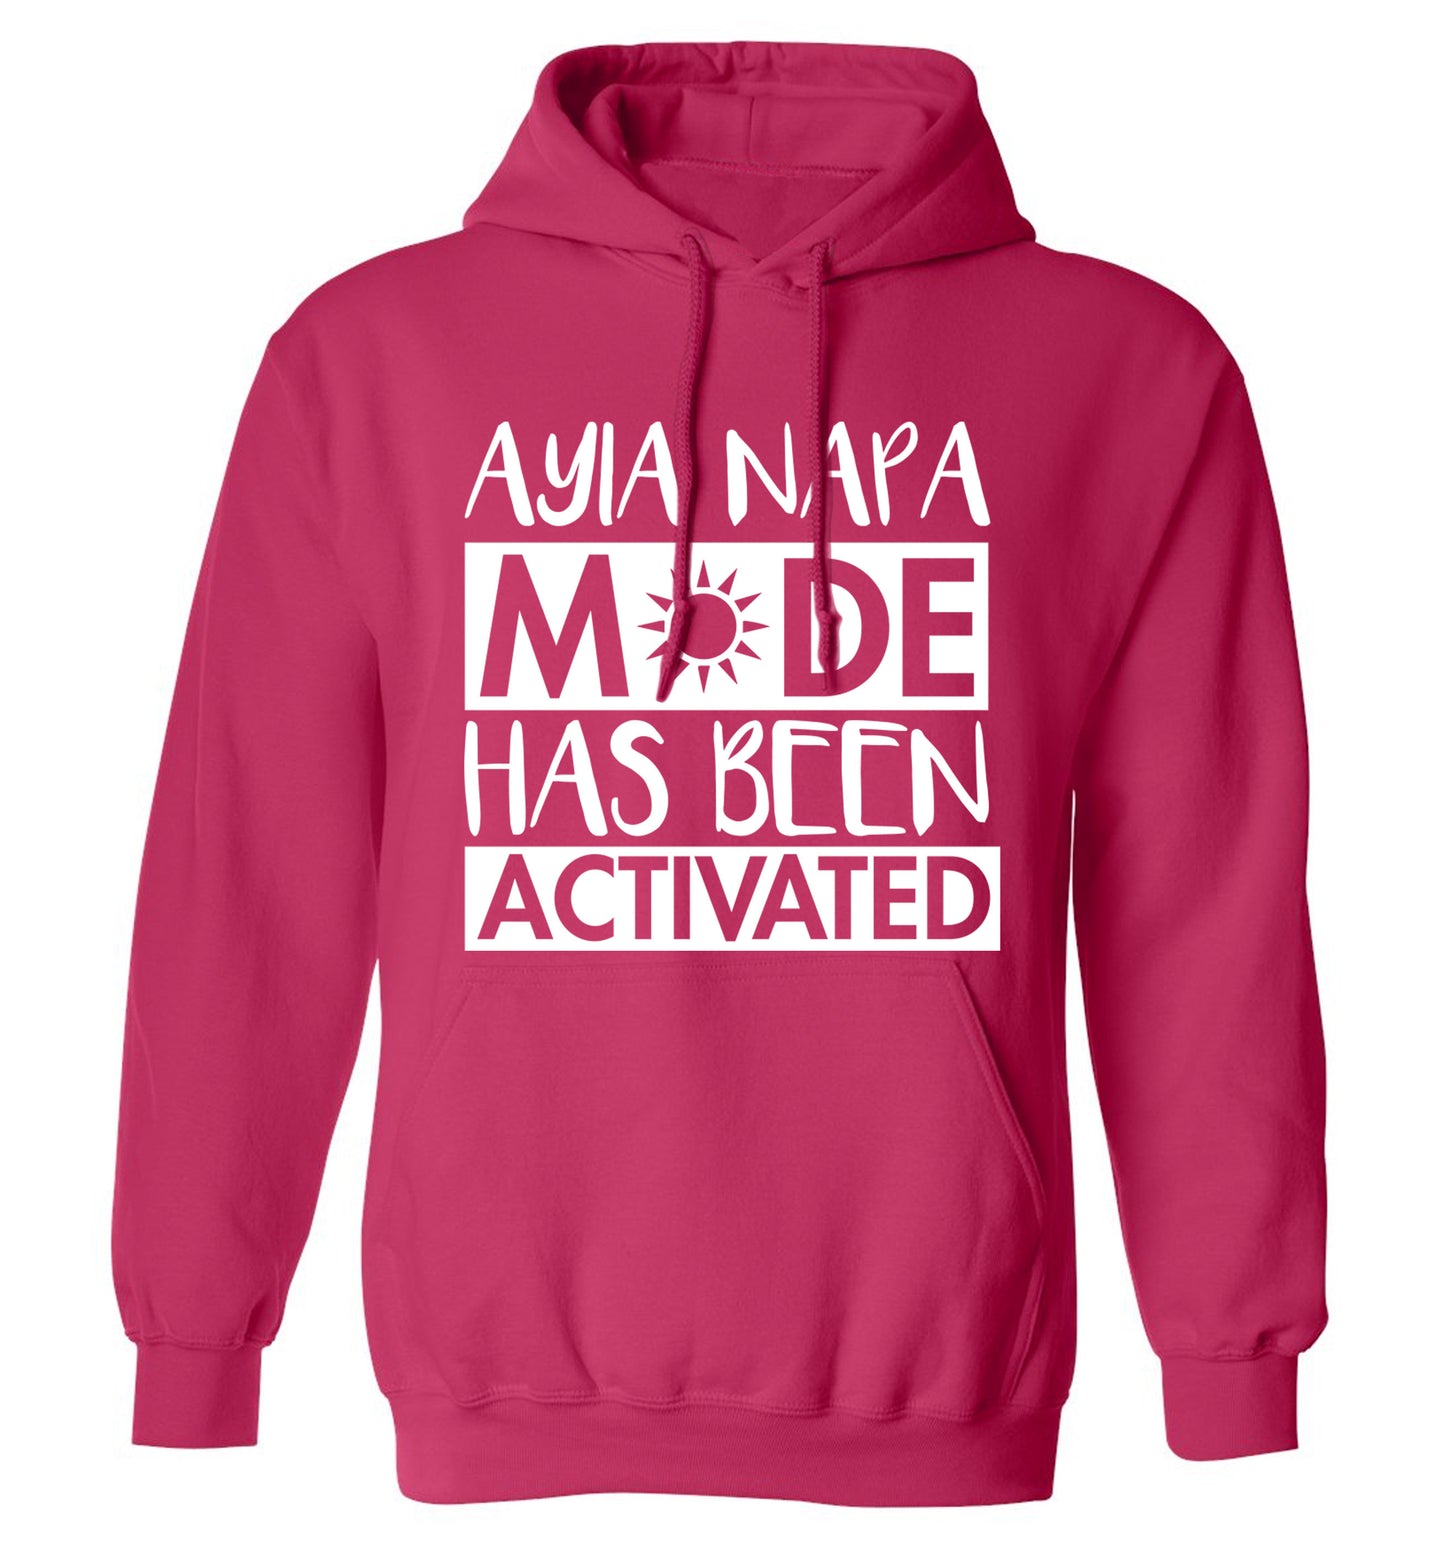 Aiya Napa mode has been activated adults unisex pink hoodie 2XL